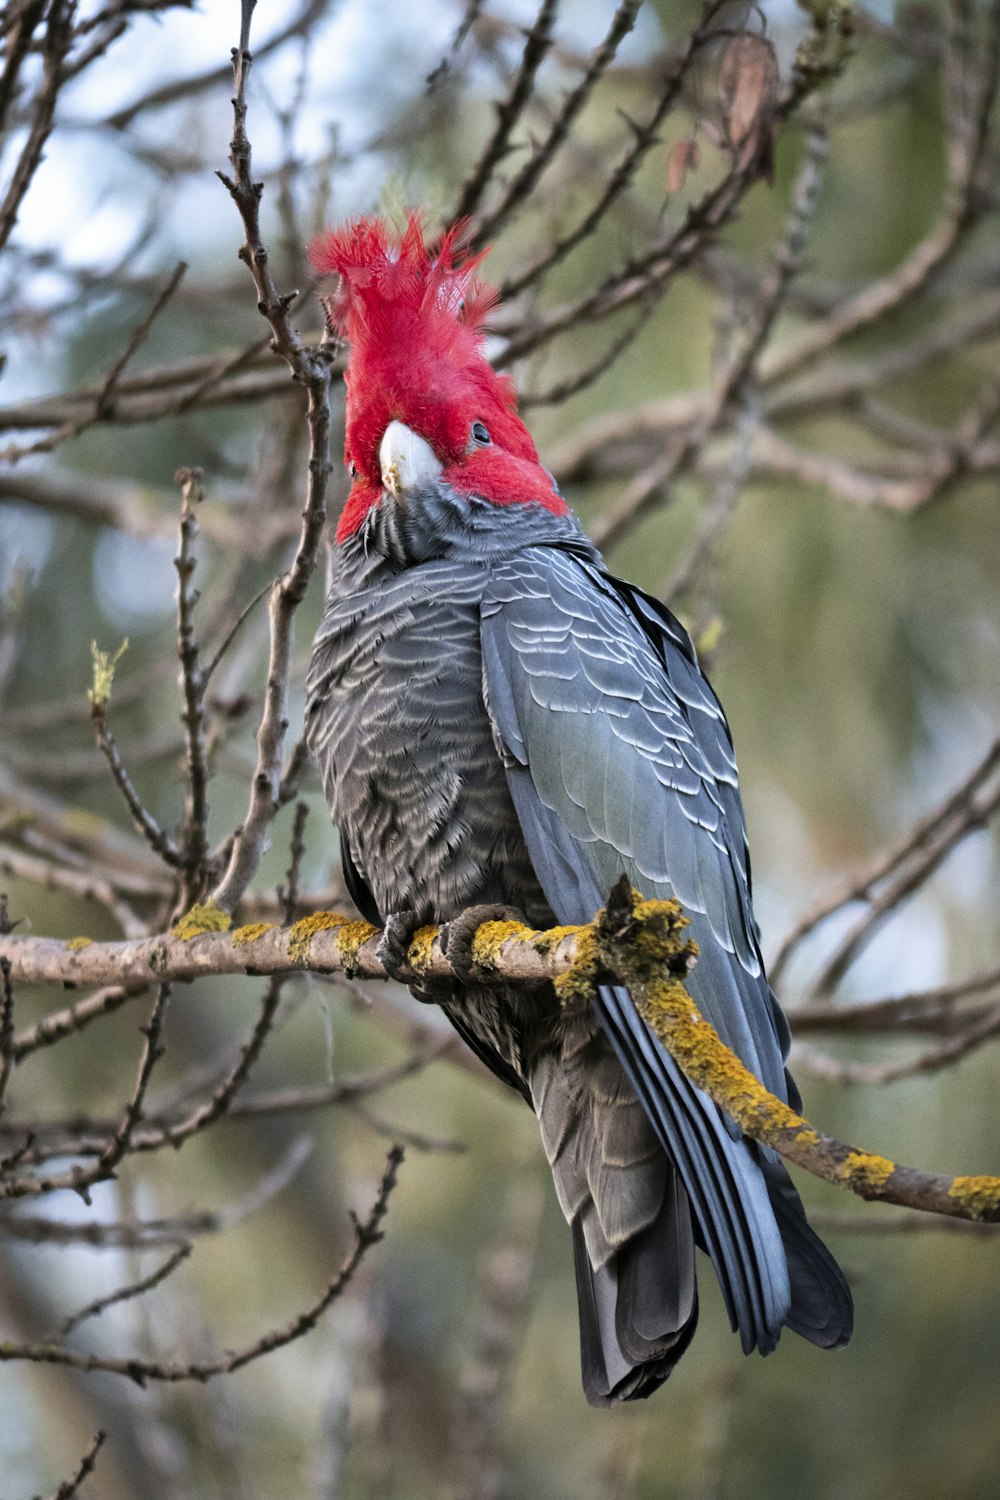 red and grey bird on brown tree branch during daytime